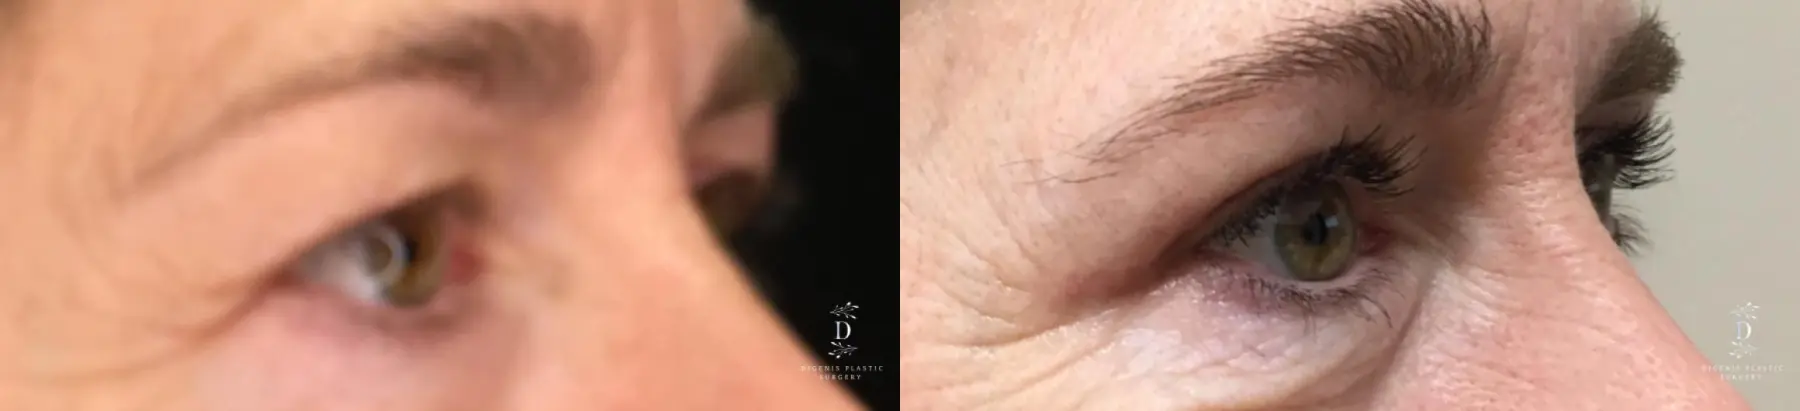 Eyelid Surgery: Patient 32 - Before and After 2